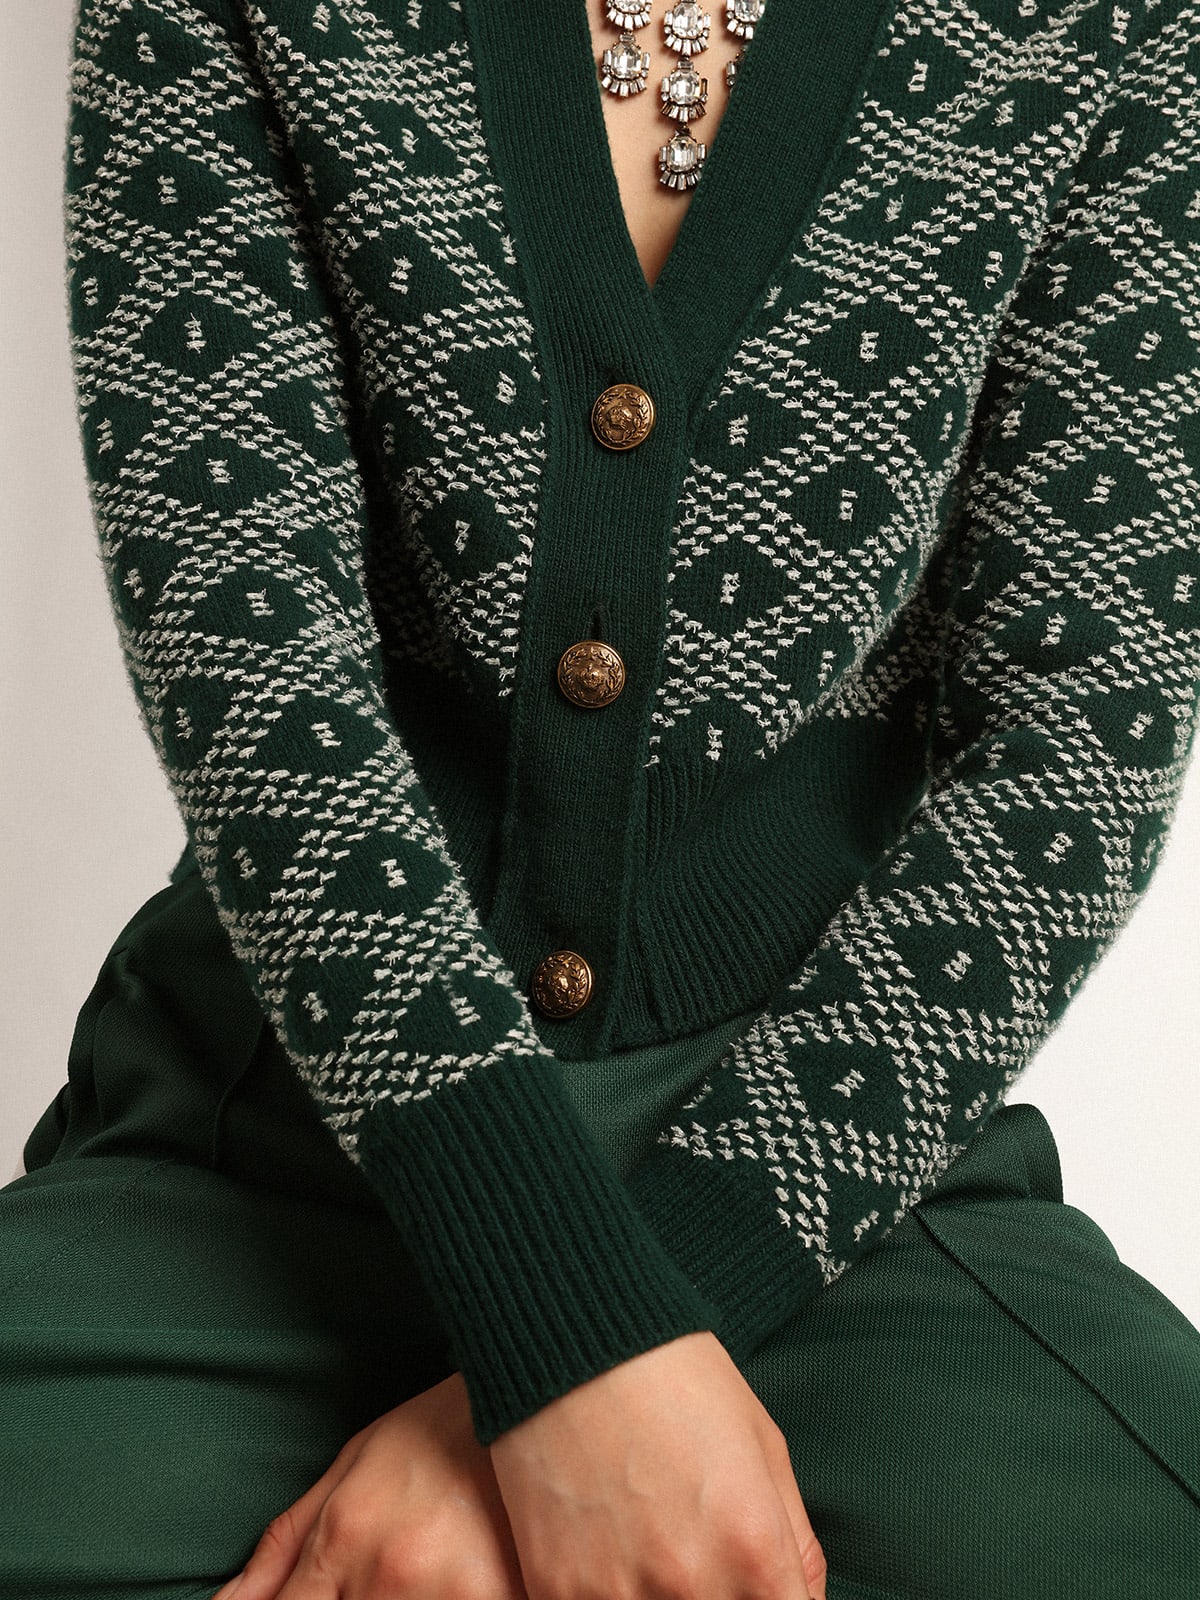 Golden Goose - Journey Collection cropped cardigan with green and white jacquard diamond pattern in 